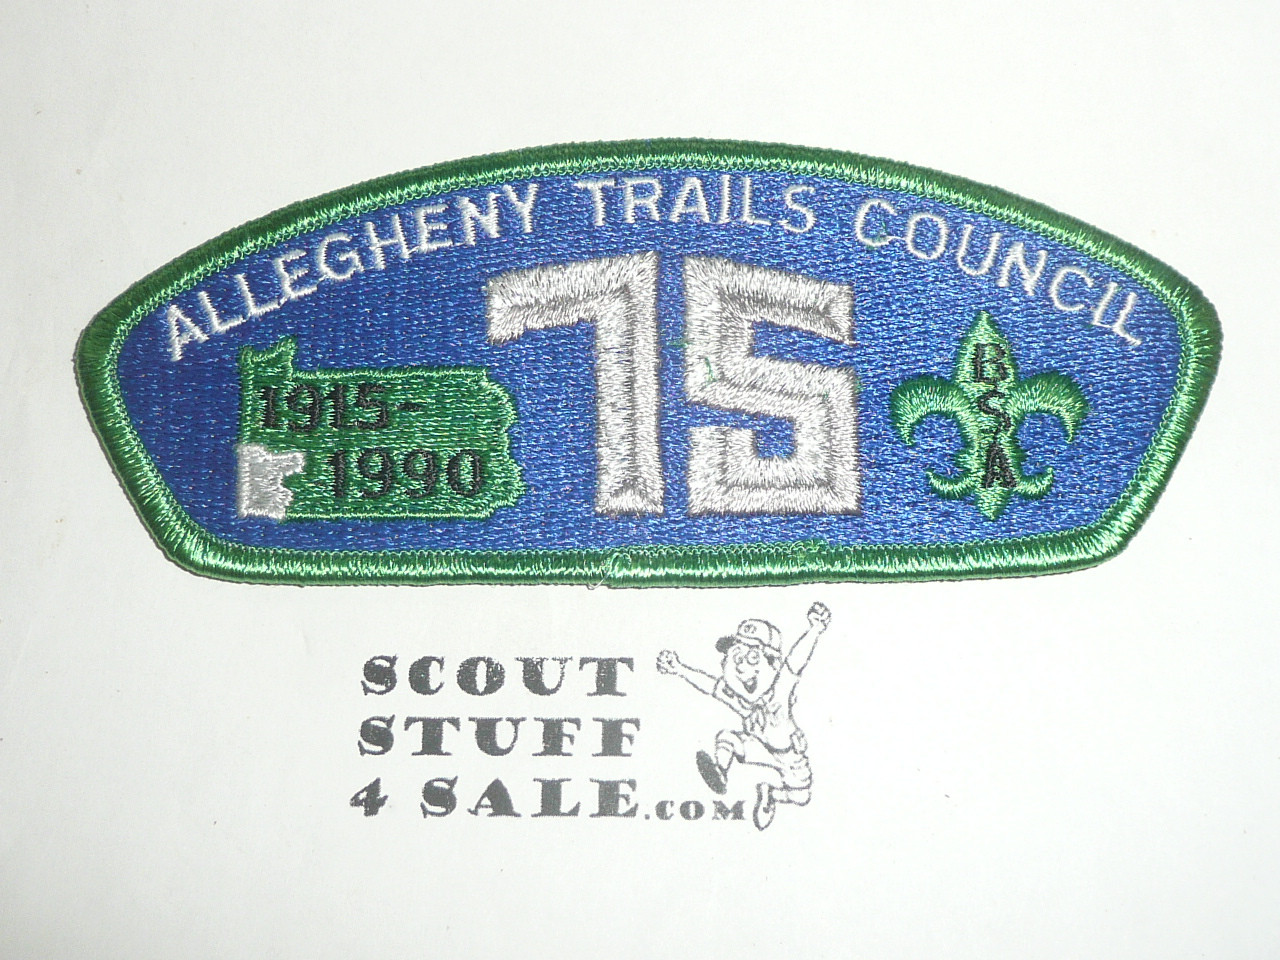 Allegheny Trails Council s8 CSP - 75th Anniversary of Council